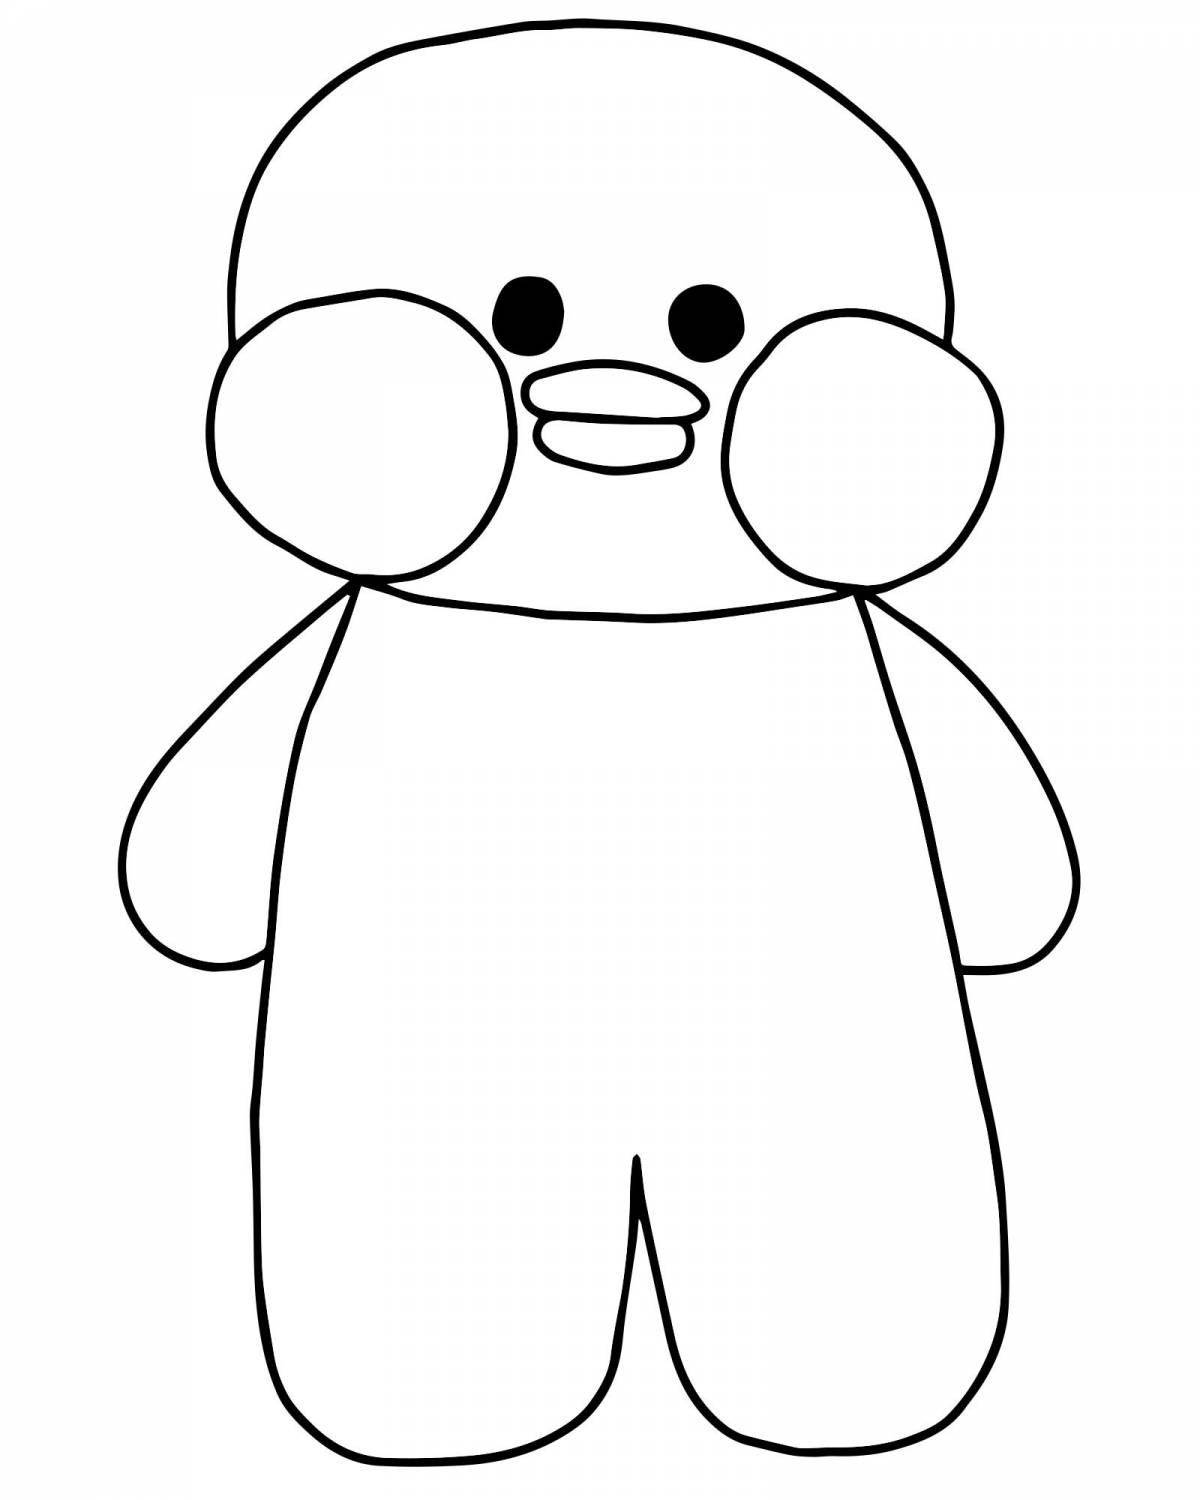 Coloring pages chic dressed duck